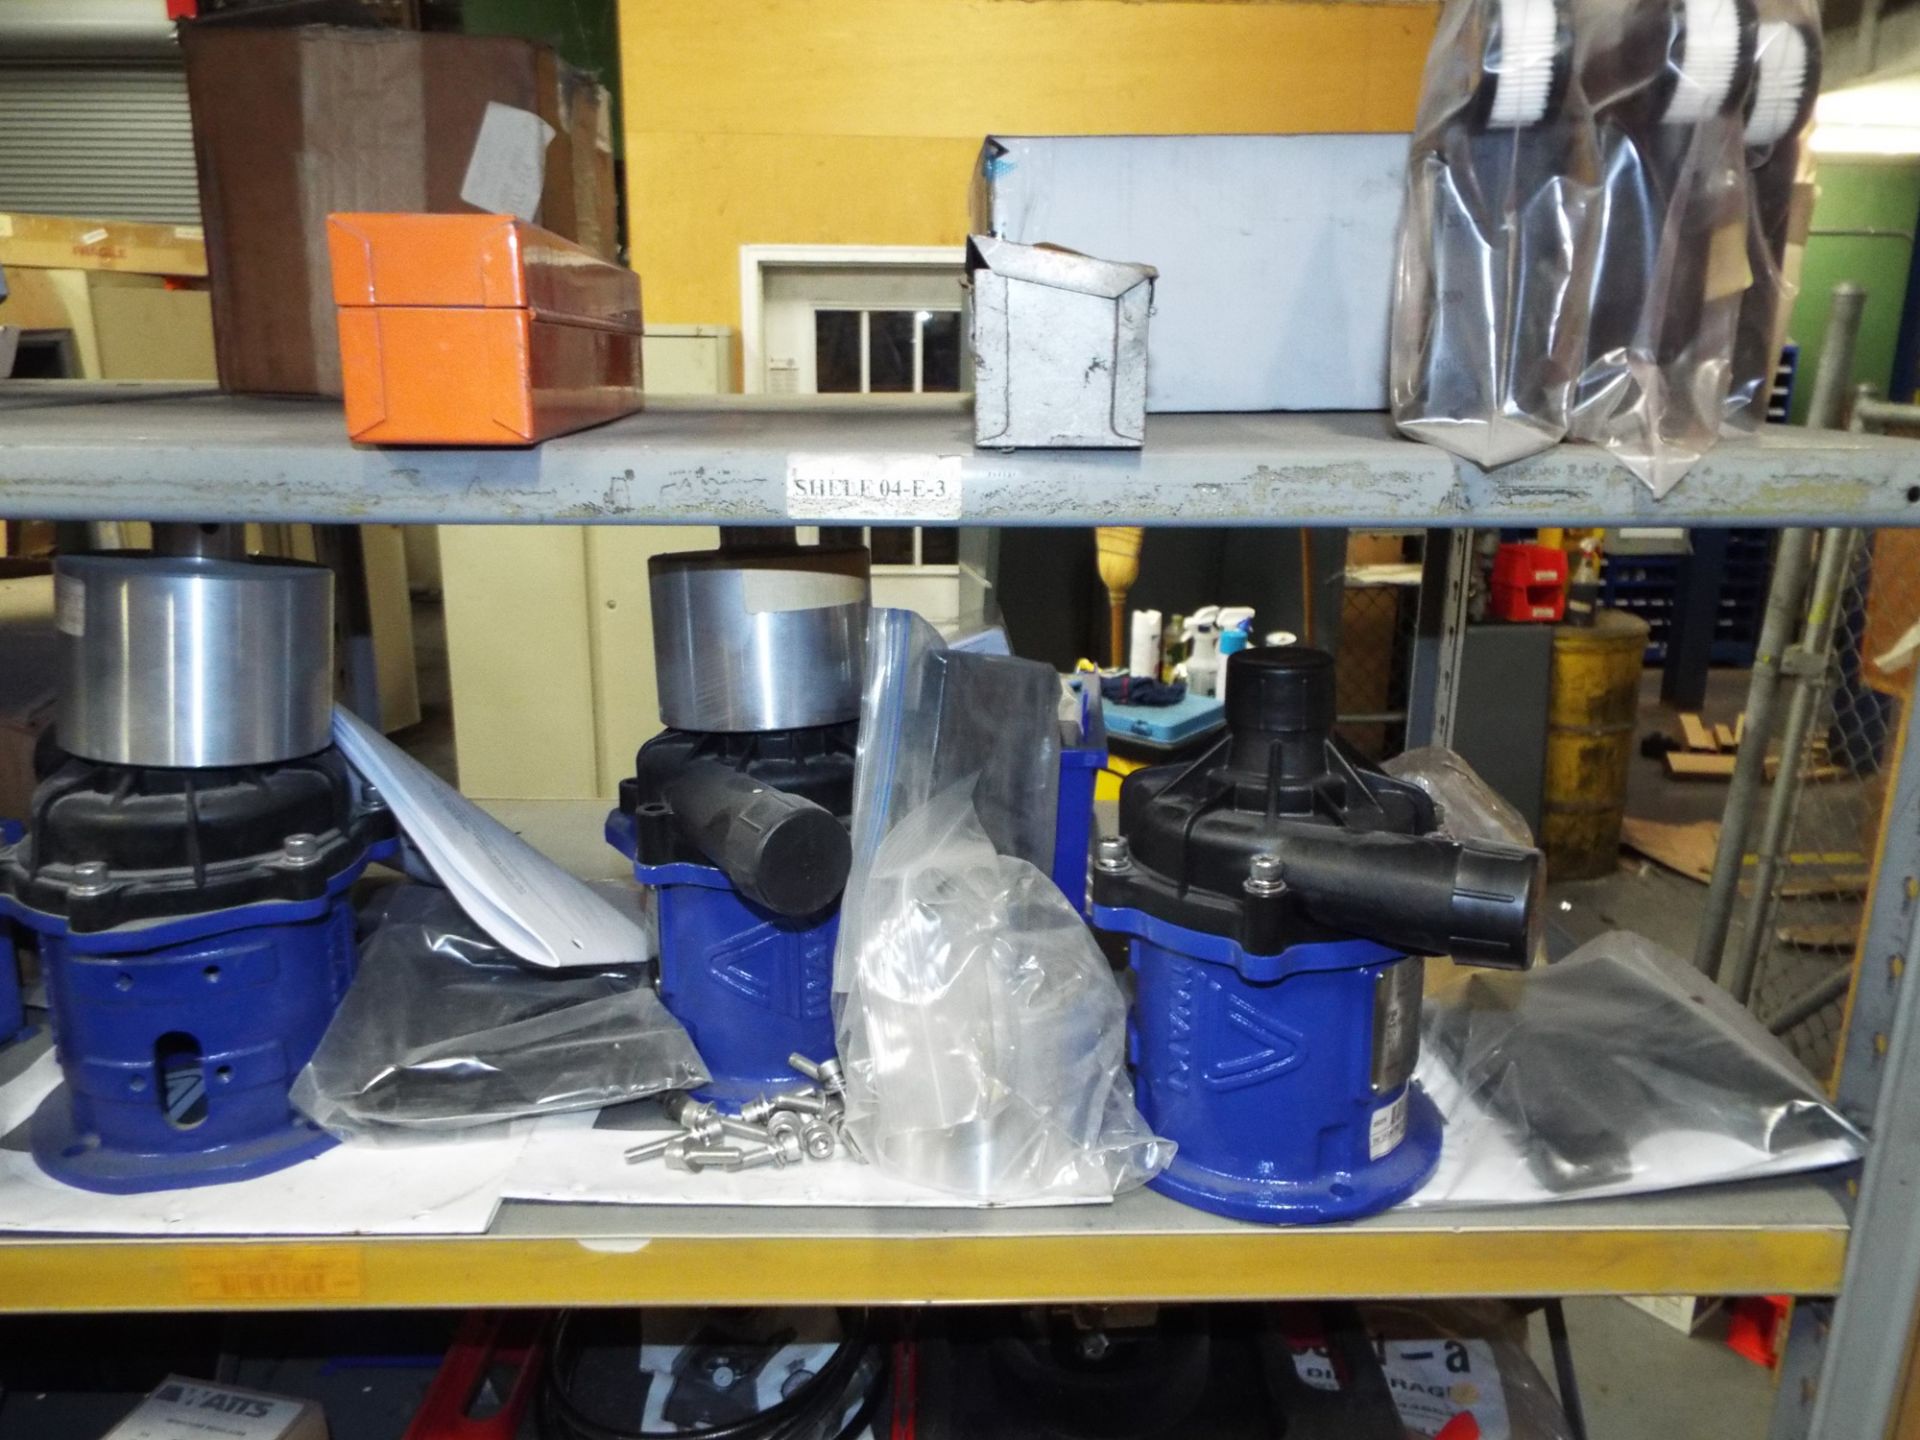 LOT/ CONTENTS OF SHELF - INCLUDING BUT NOT LIMITED TO GAUGES, GRINDERS, PVC PIPE FITTINGS AND - Image 4 of 7